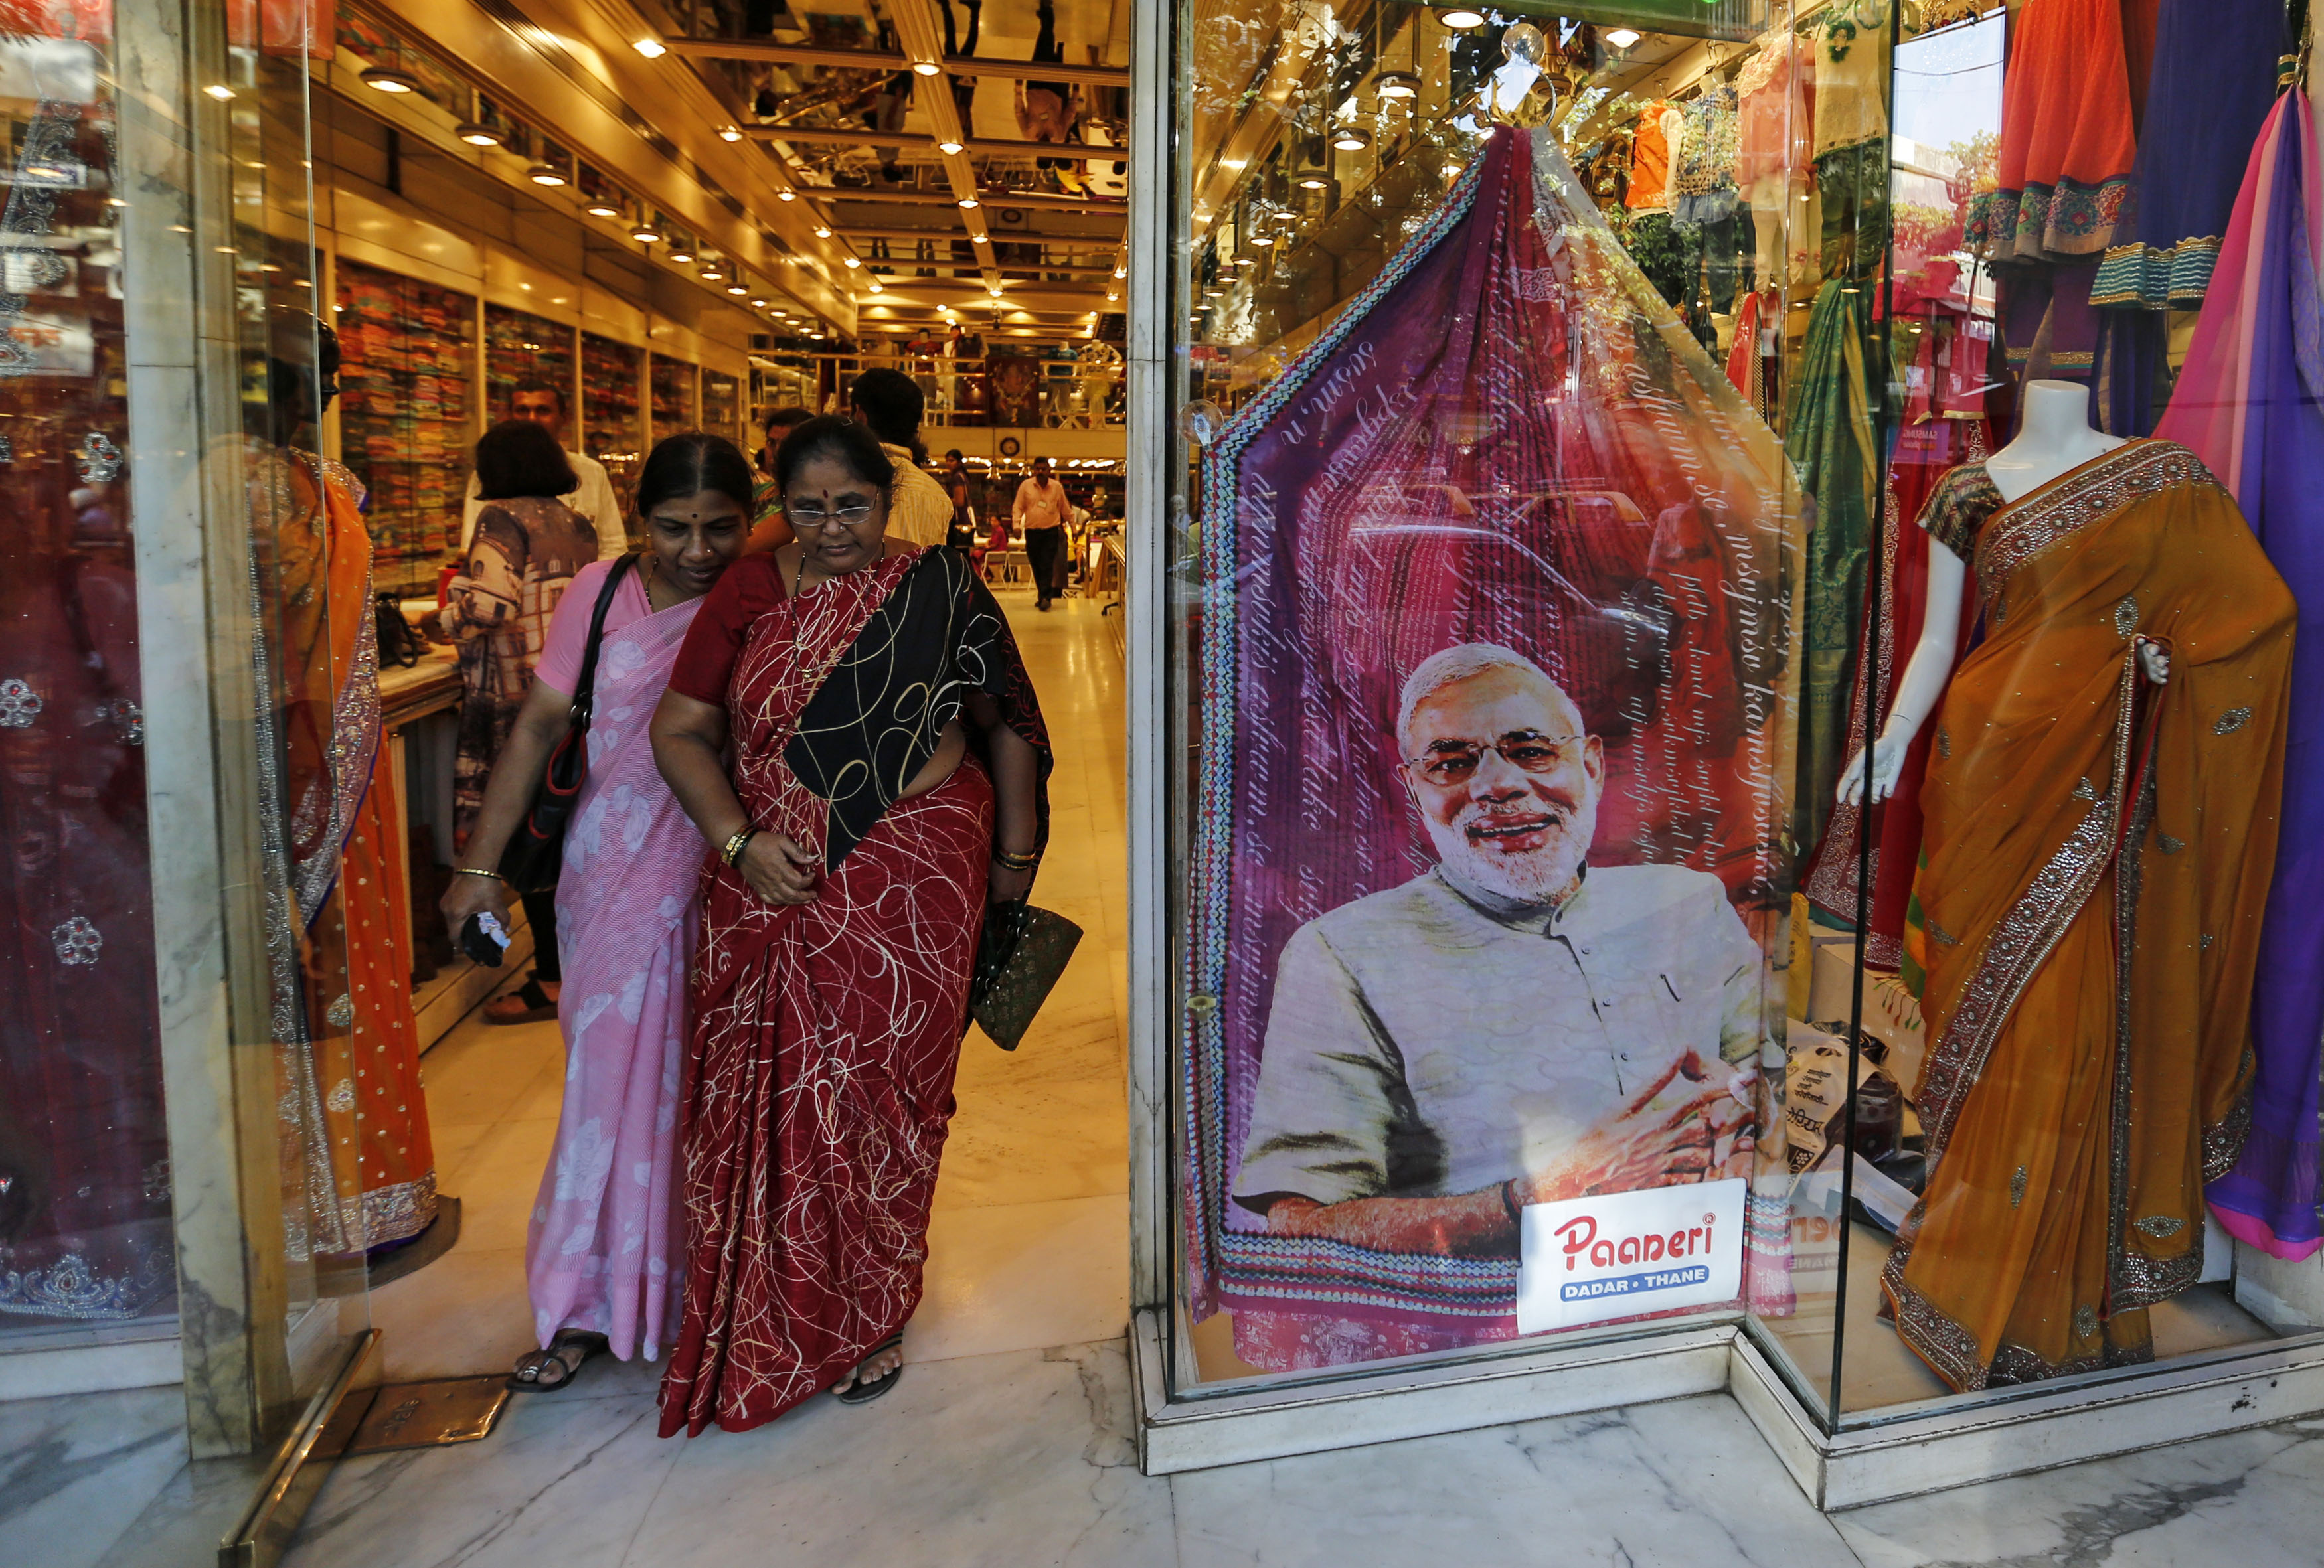 Customers walks past a sari, a traditional women's clothing, printed with a portrait of Hindu nationalist Narendra Modi, the prime ministerial candidate for India's main opposition Bharatiya Janata Party (BJP), at a showroom in Mumbai